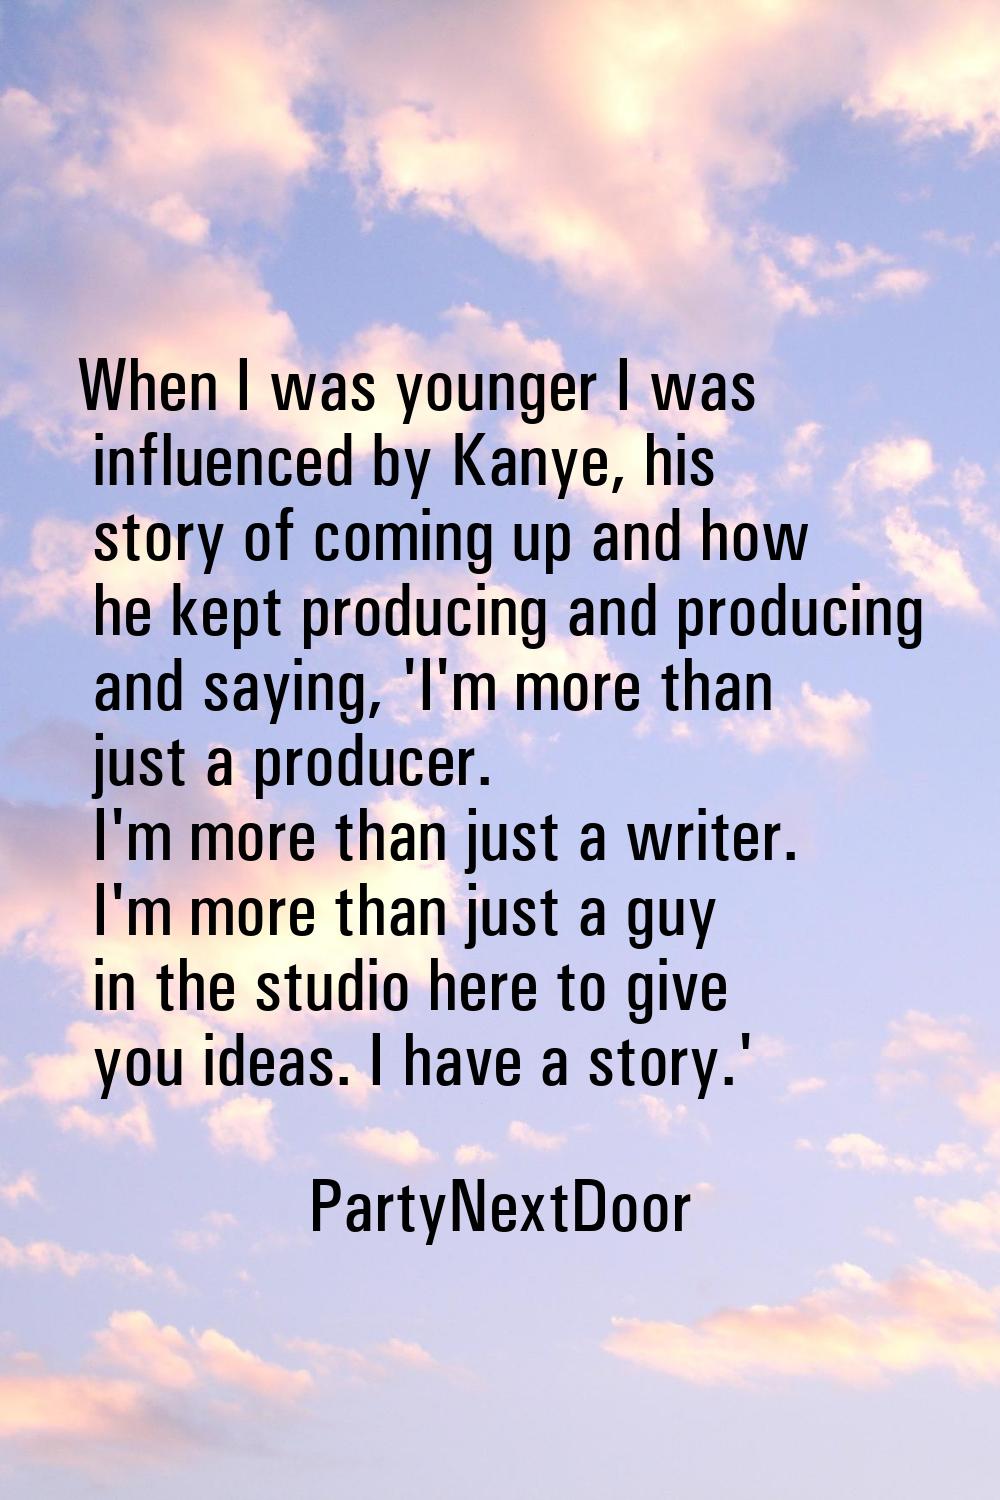 When I was younger I was influenced by Kanye, his story of coming up and how he kept producing and 